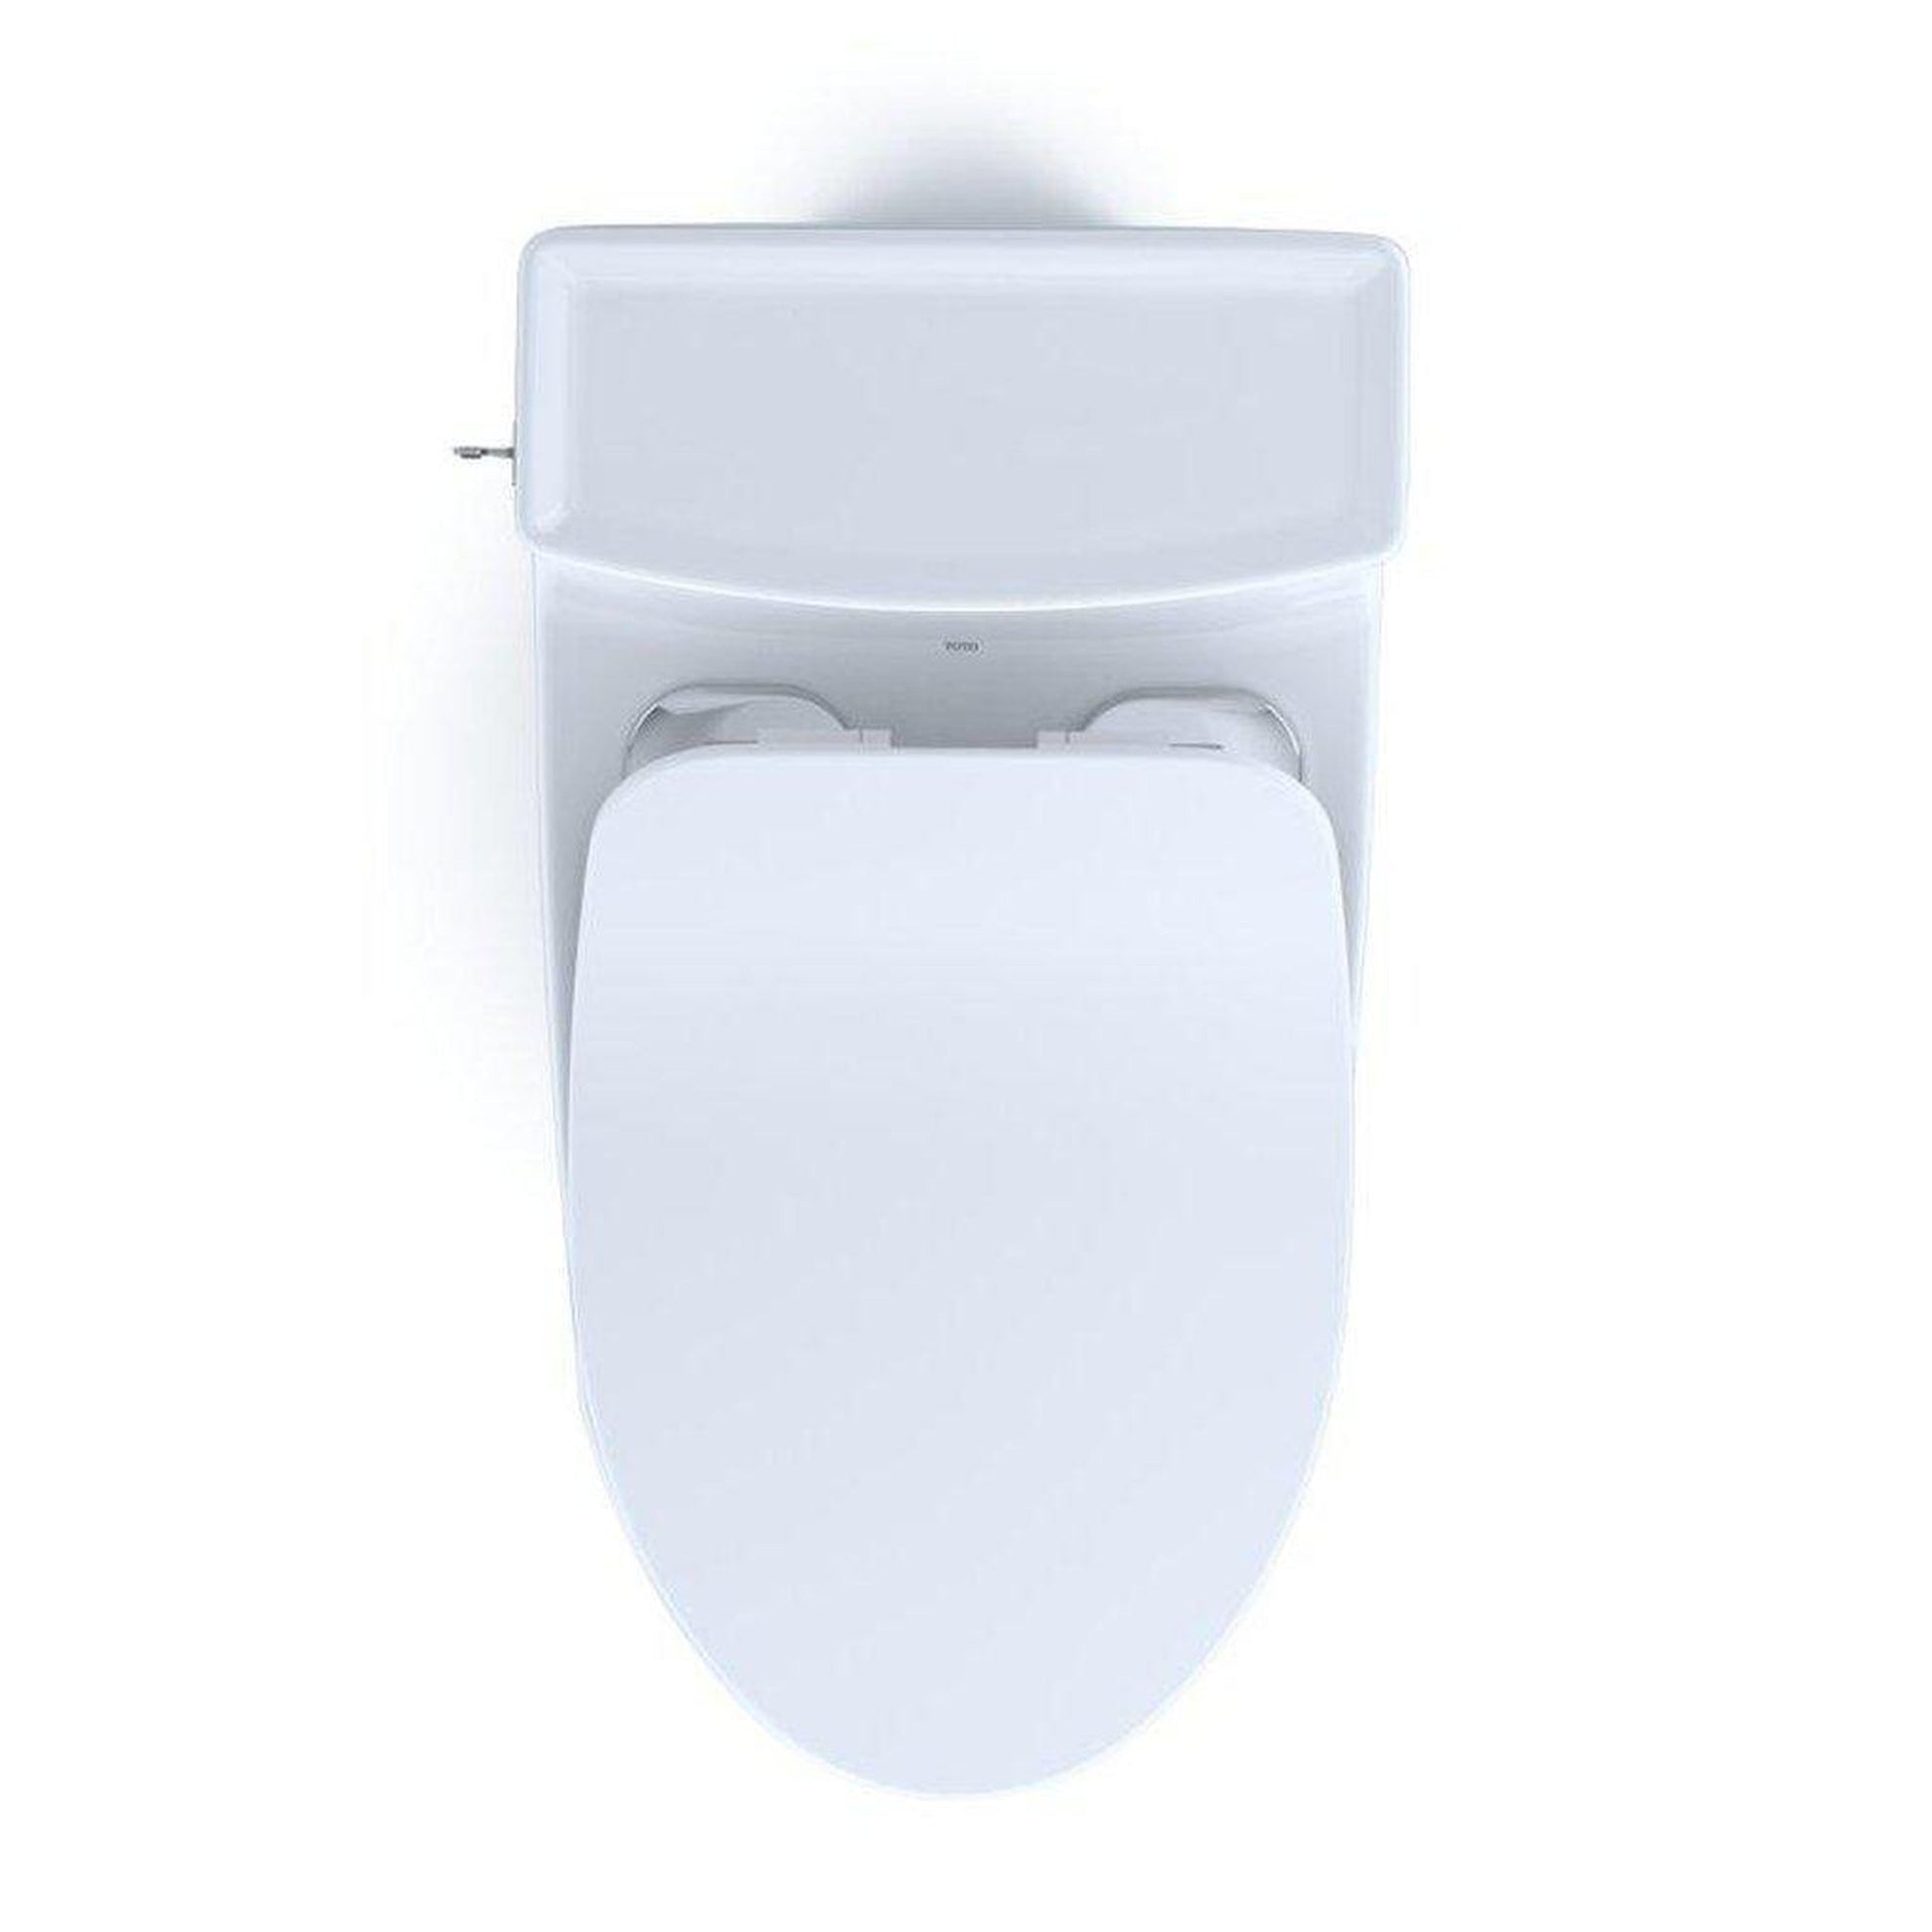 TOTO Aimes Cotton White 1.28 GPF Elongated One-Piece Toilet With Slim Seat & Washlet+ Connection